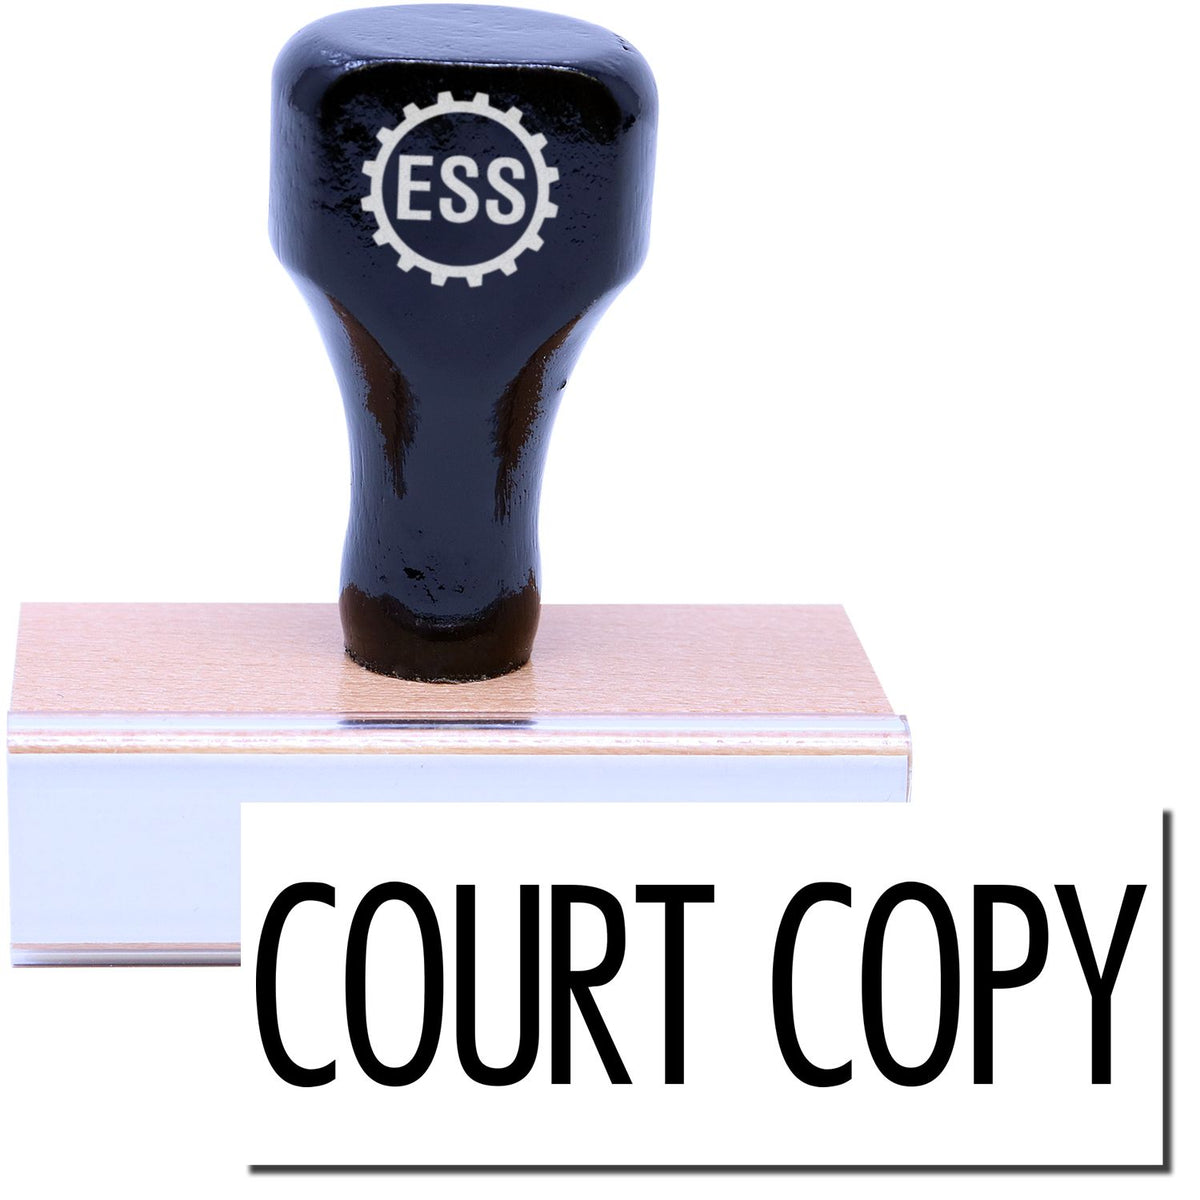 A stock office rubber stamp with a stamped image showing how the text &quot;COURT COPY&quot; in a large narrow font is displayed after stamping.